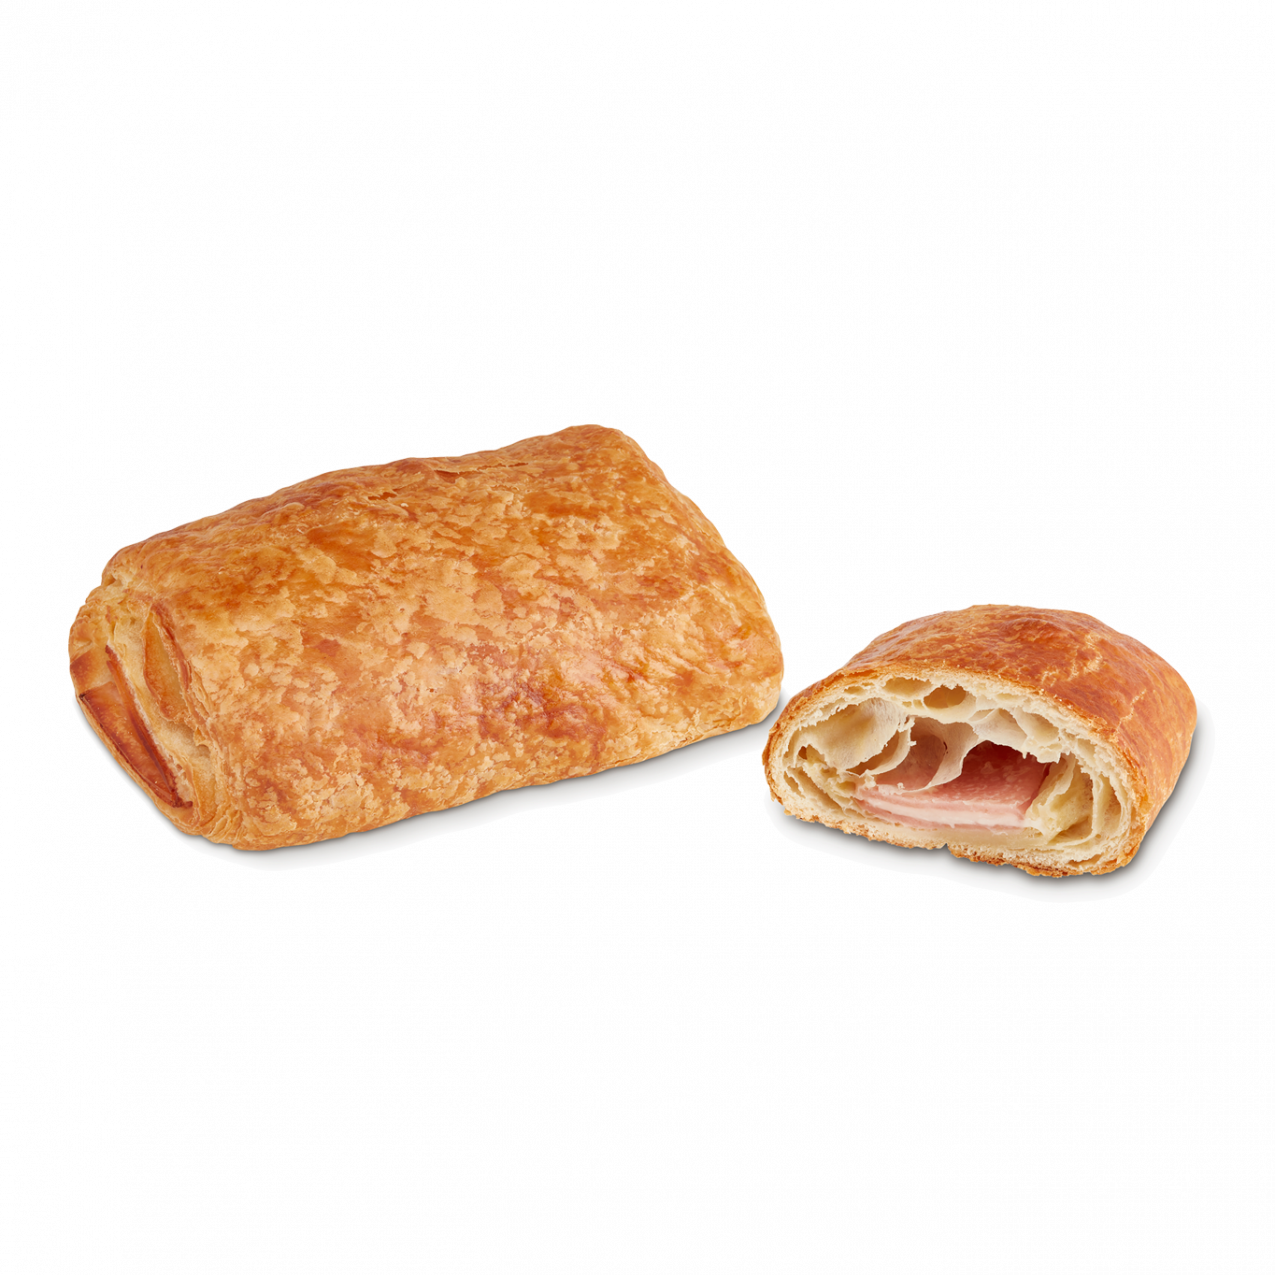 Jambon et fromage napolitain